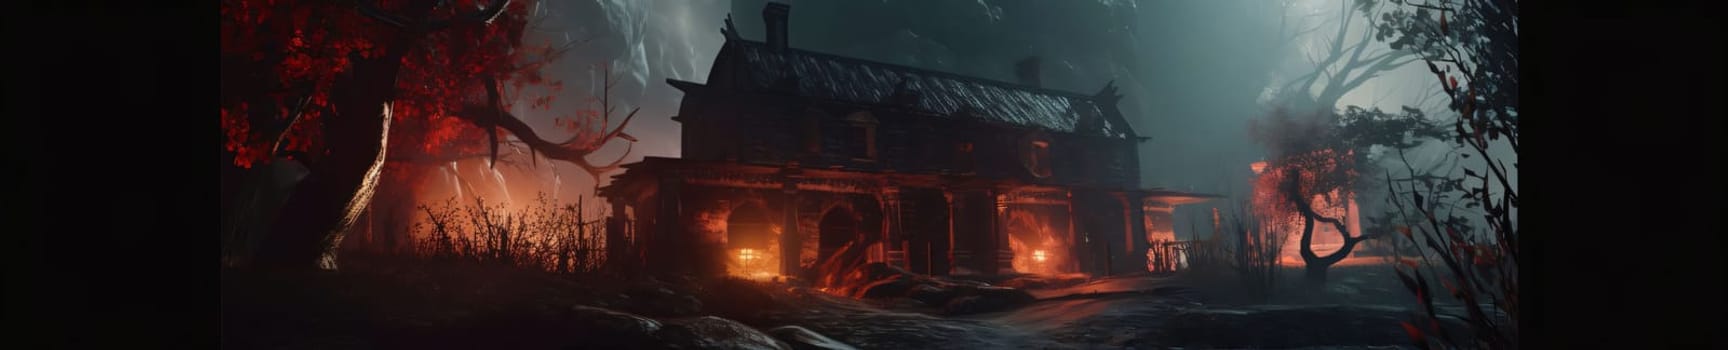 Banner: Halloween concept. Horror scene with haunted house at night. Horror Halloween background